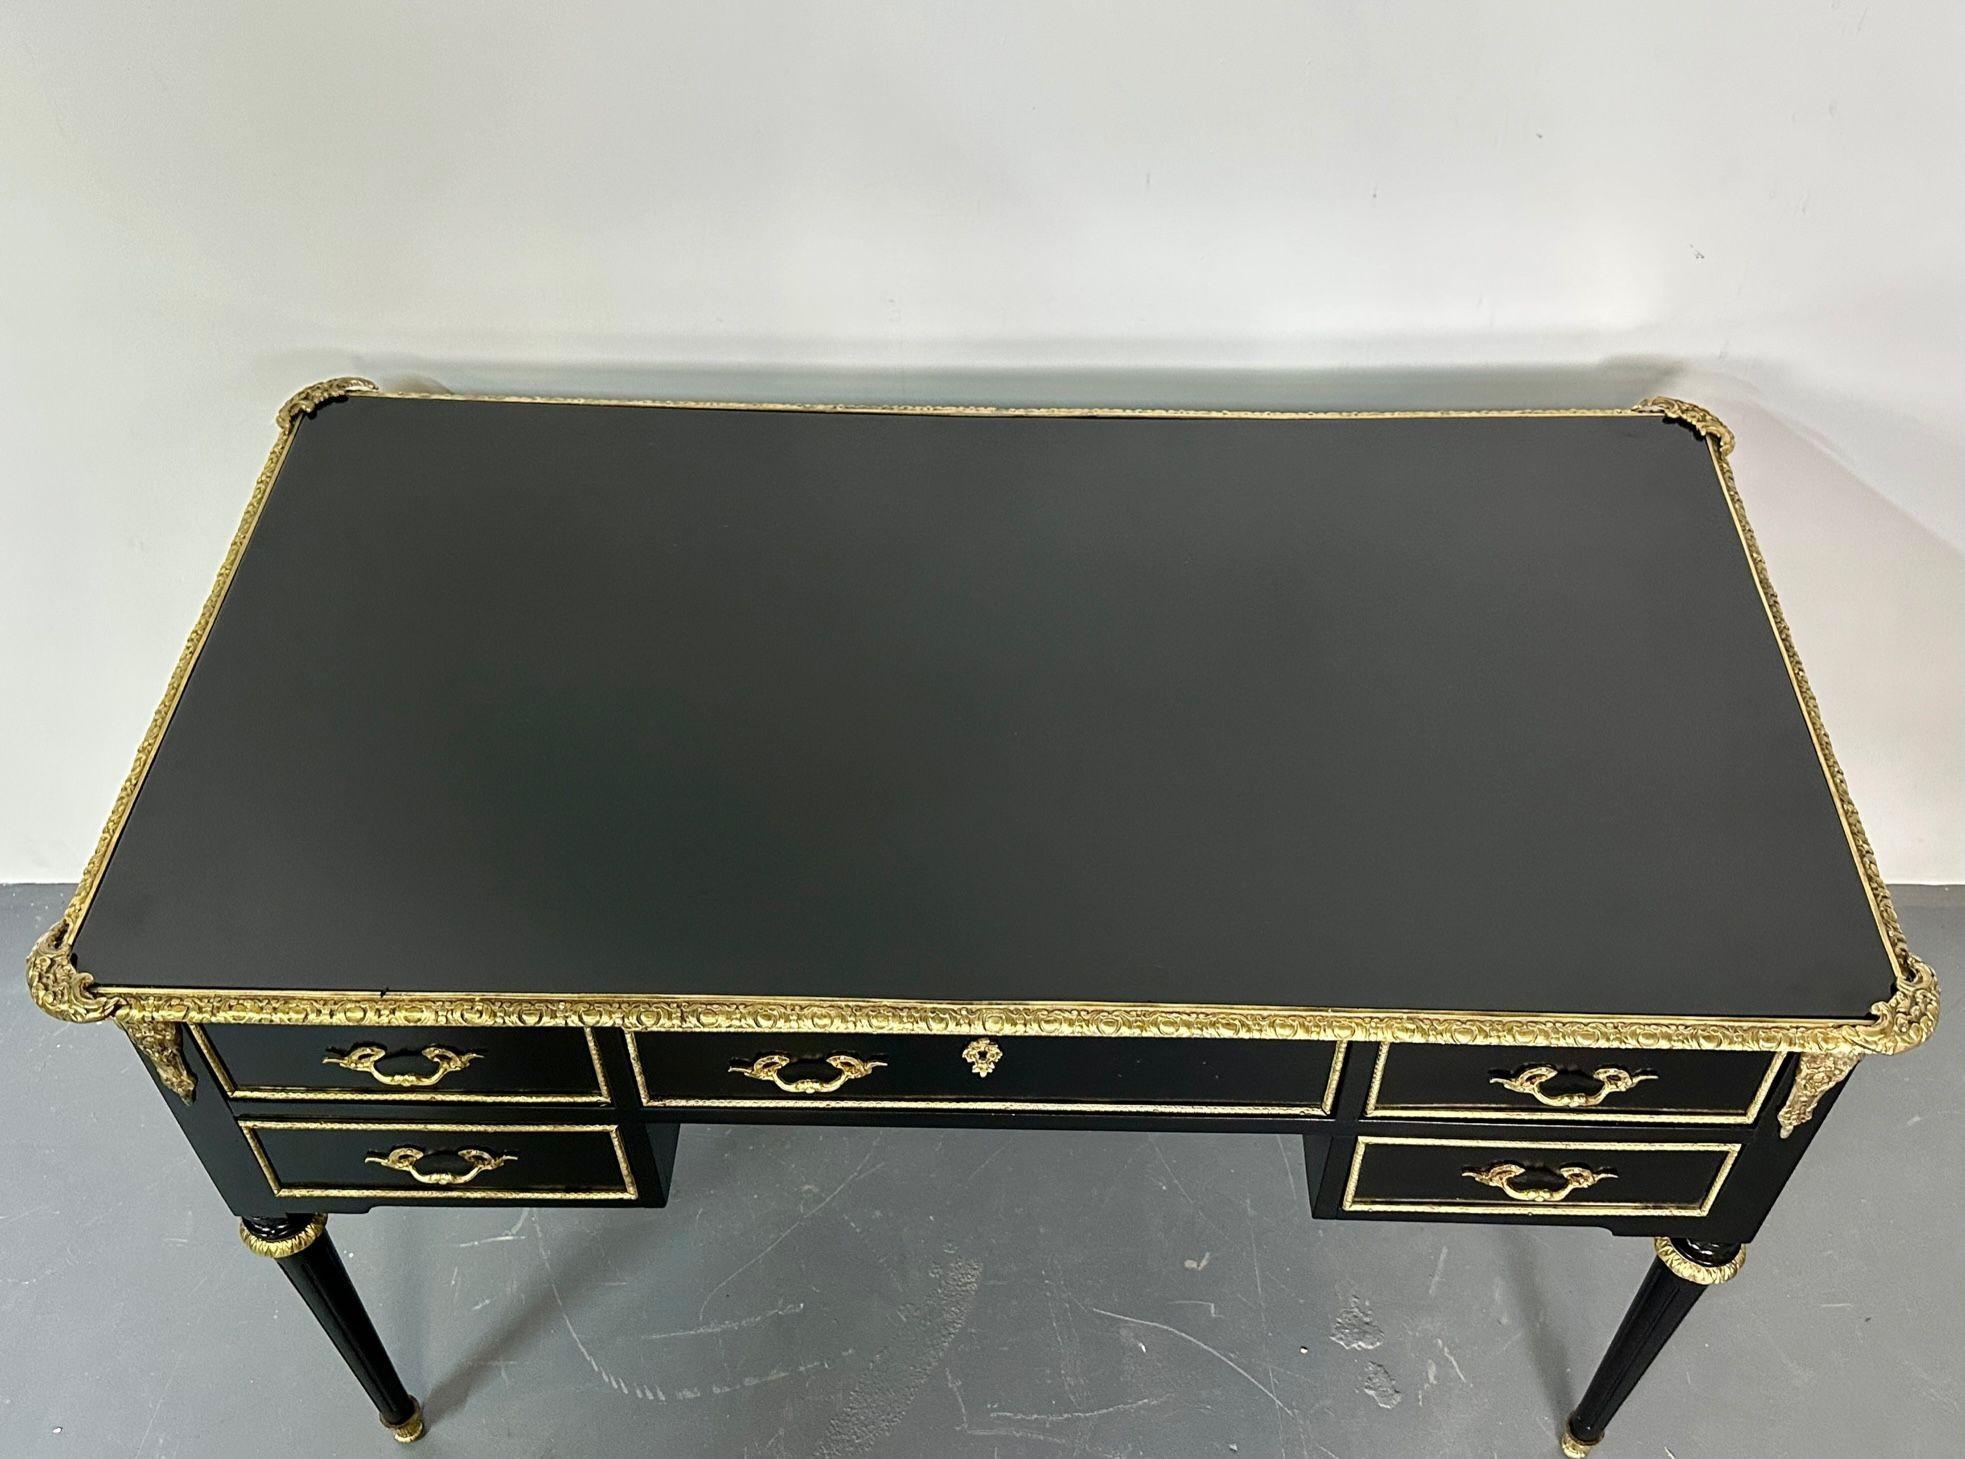 Hollywood Regency Ebony Desk, Writing Table or Vanity, Bronze Mounted, 1930s In Good Condition For Sale In Stamford, CT